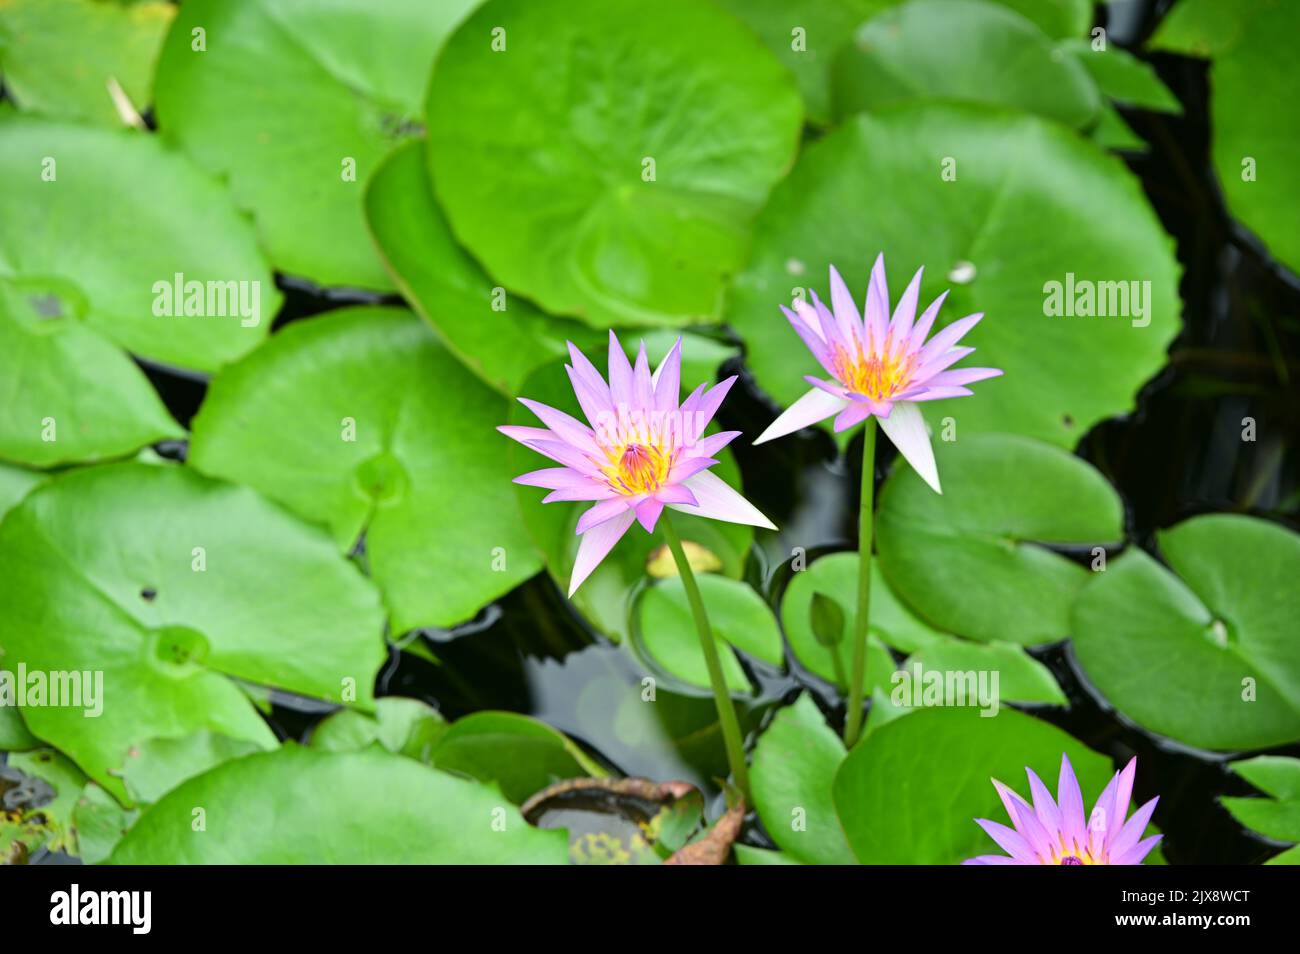 Water lilies are blooming in the pond Stock Photo